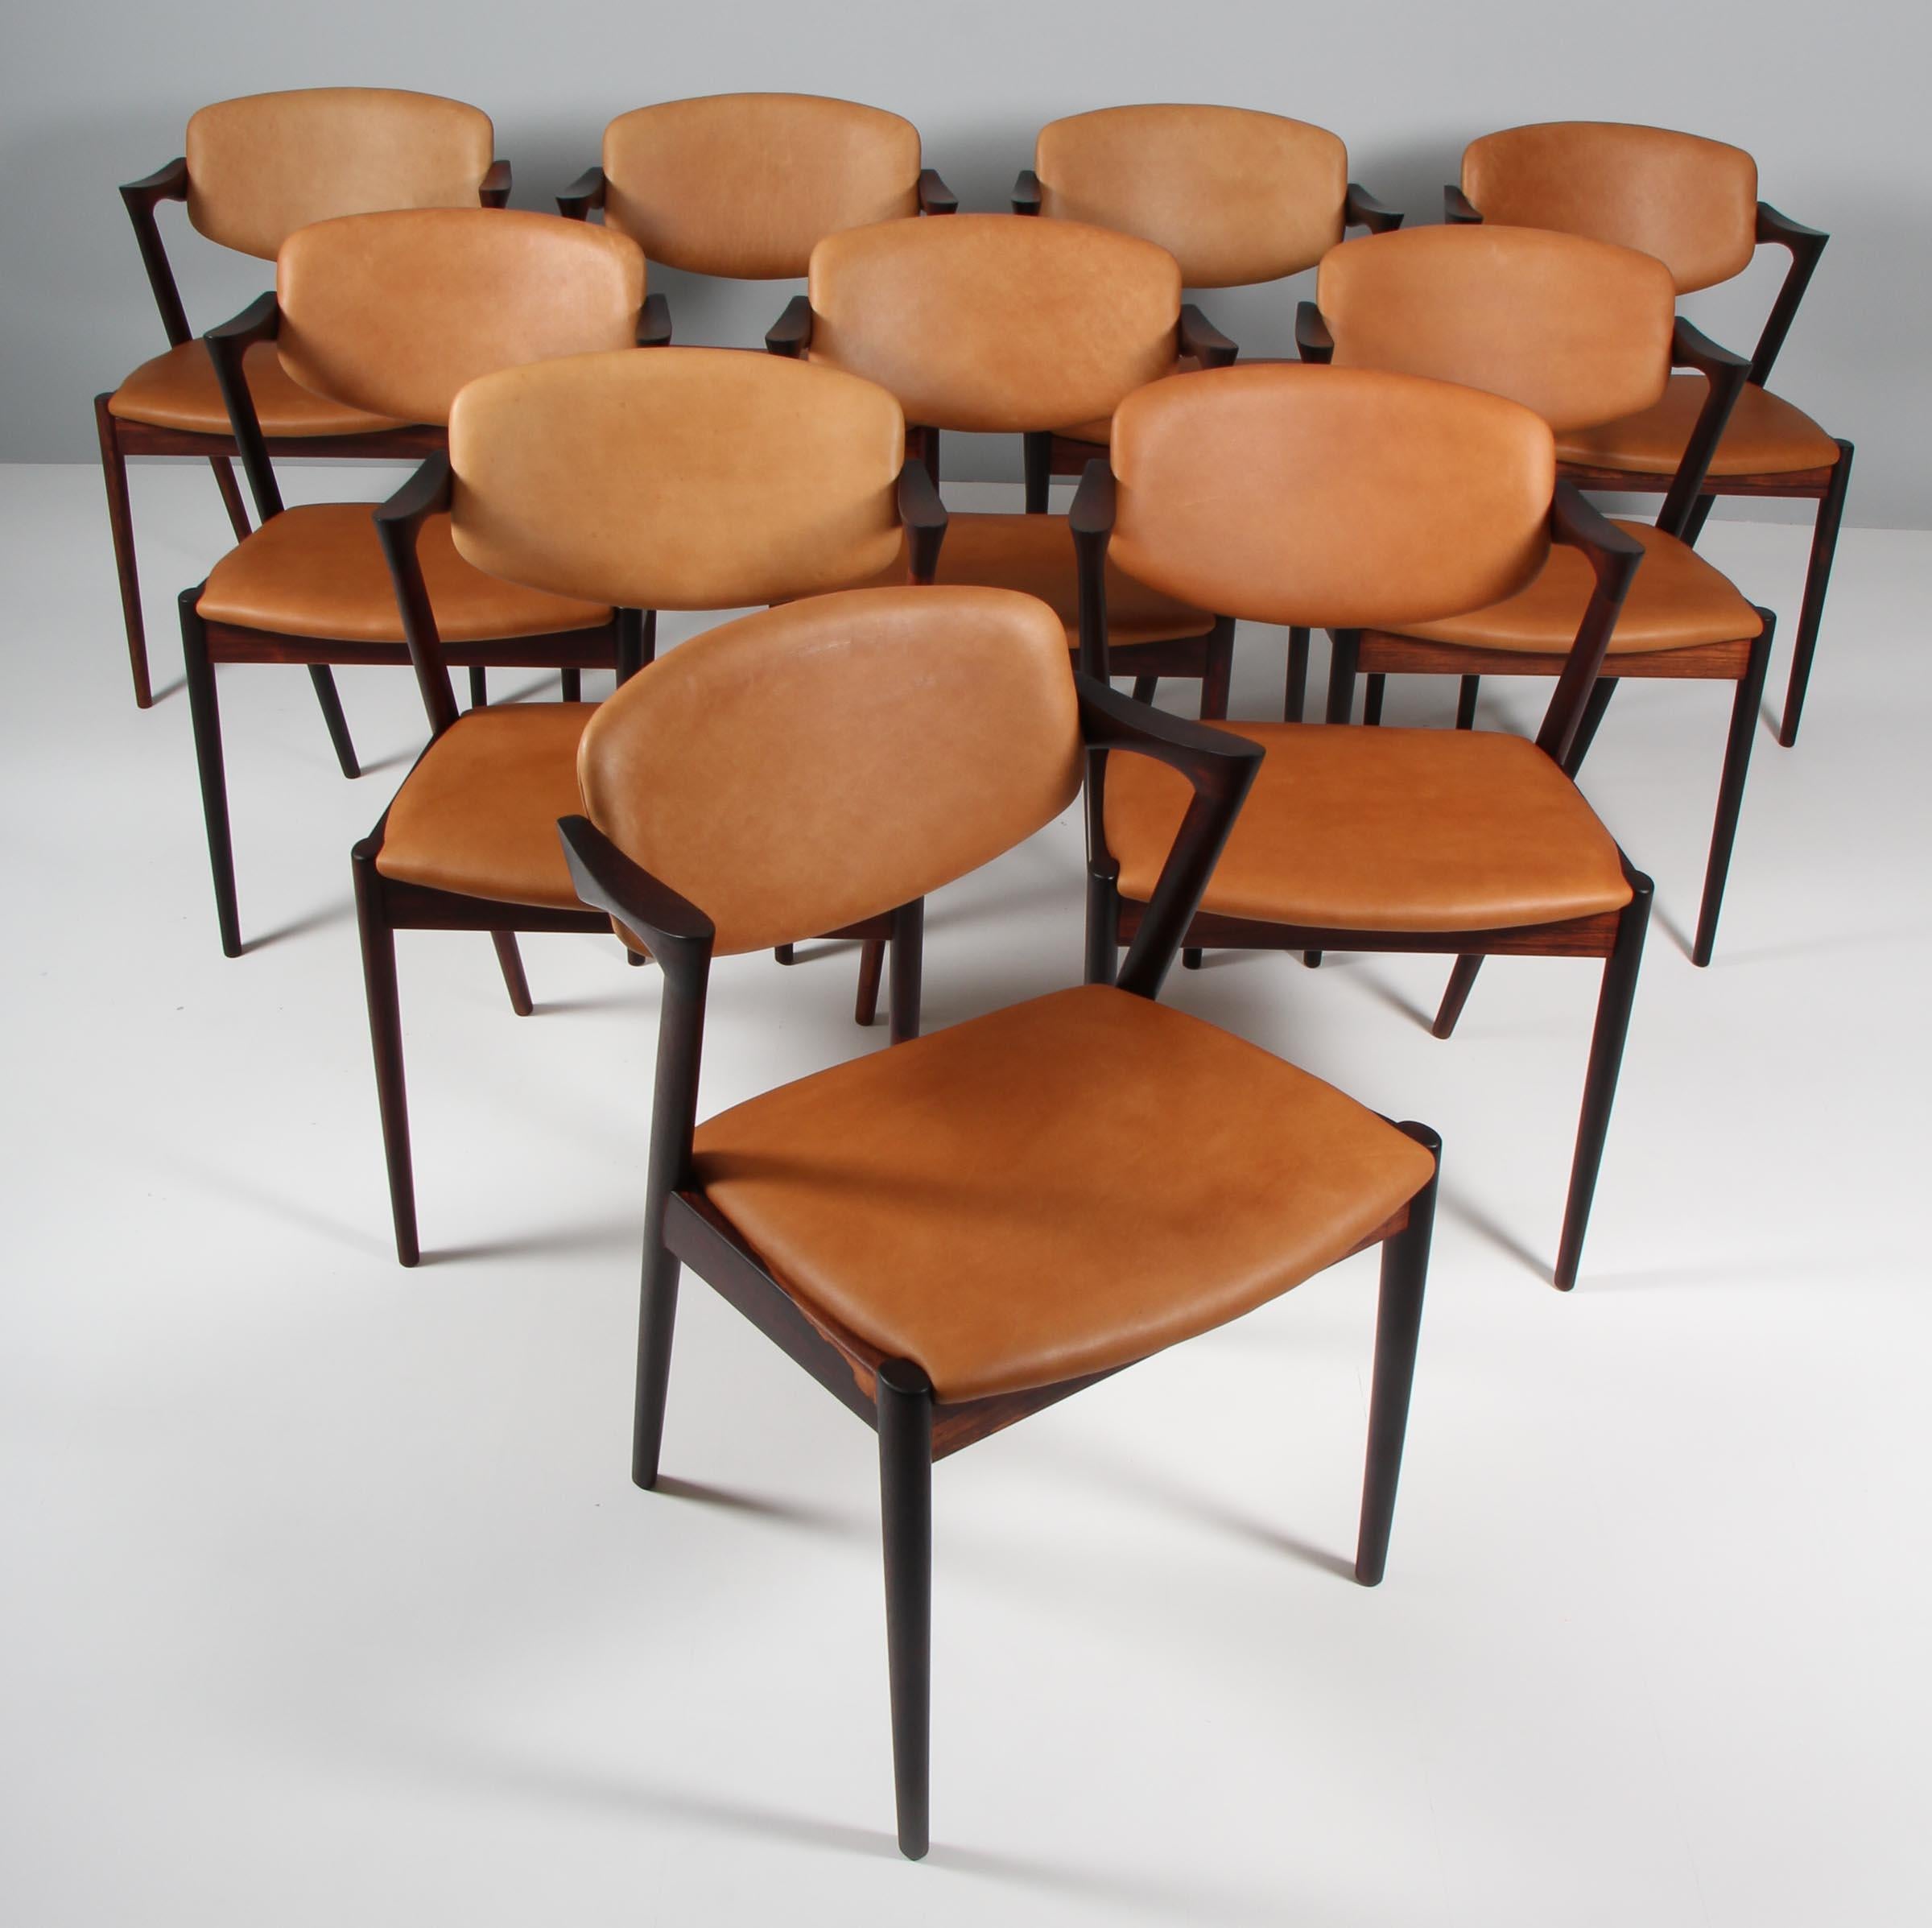 Set of dining chairs produced by Skovman Andersen for the Illum Bolighus department store in Copenhagen. Rosewood frames with seat and back reupholstered with vintage tan aniline leather. Back pad has tilt function for added comfort.
 